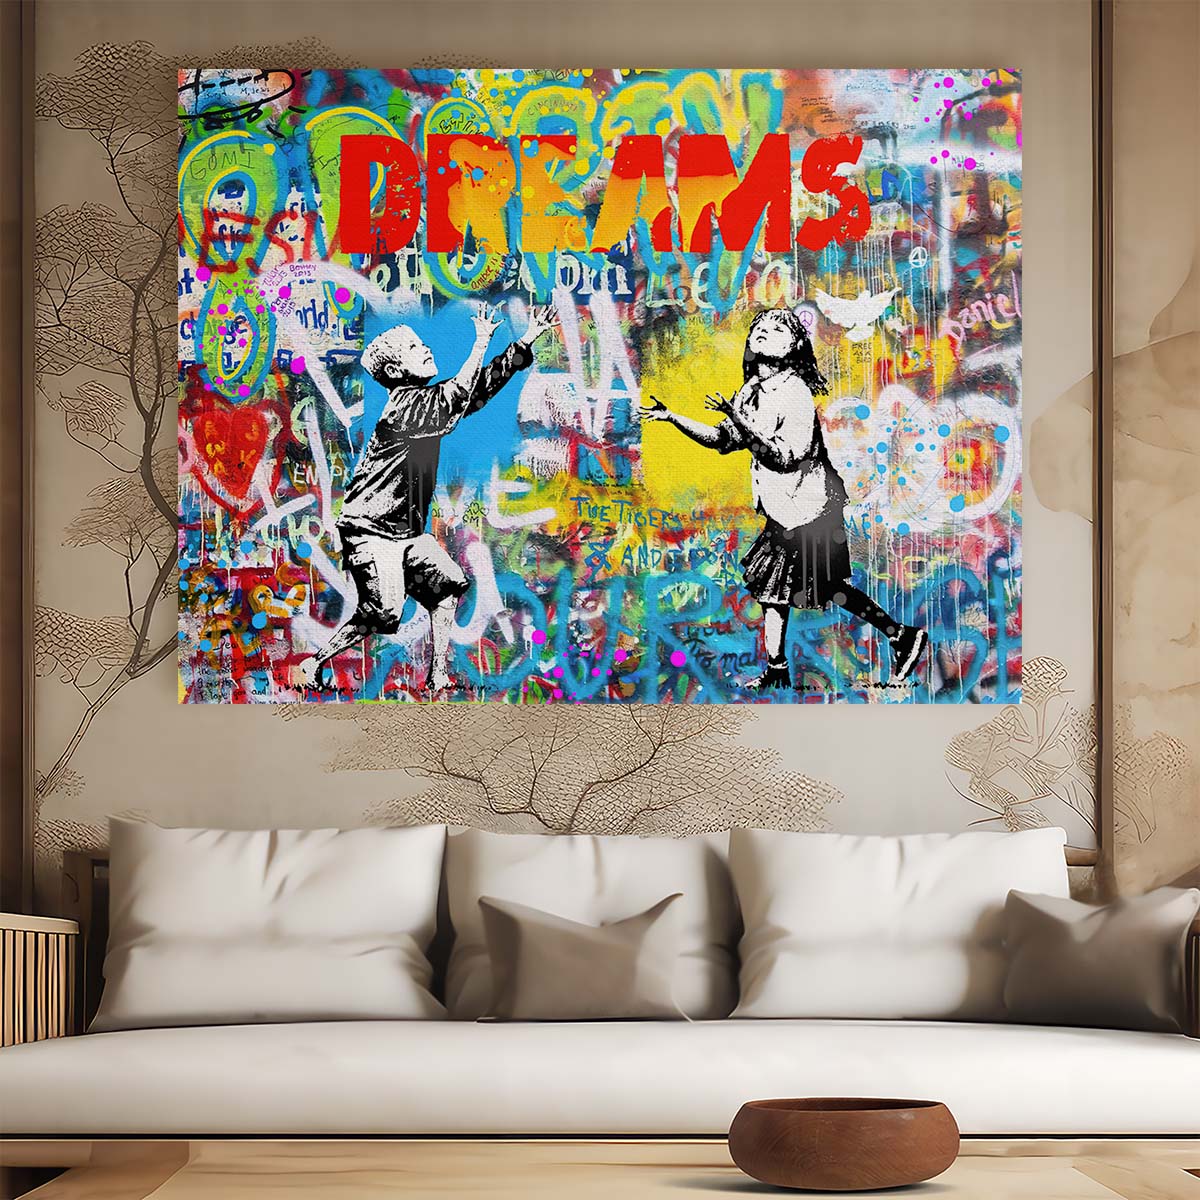 Banksy Dreams Graffiti Wall Art by Luxuriance Designs. Made in USA.